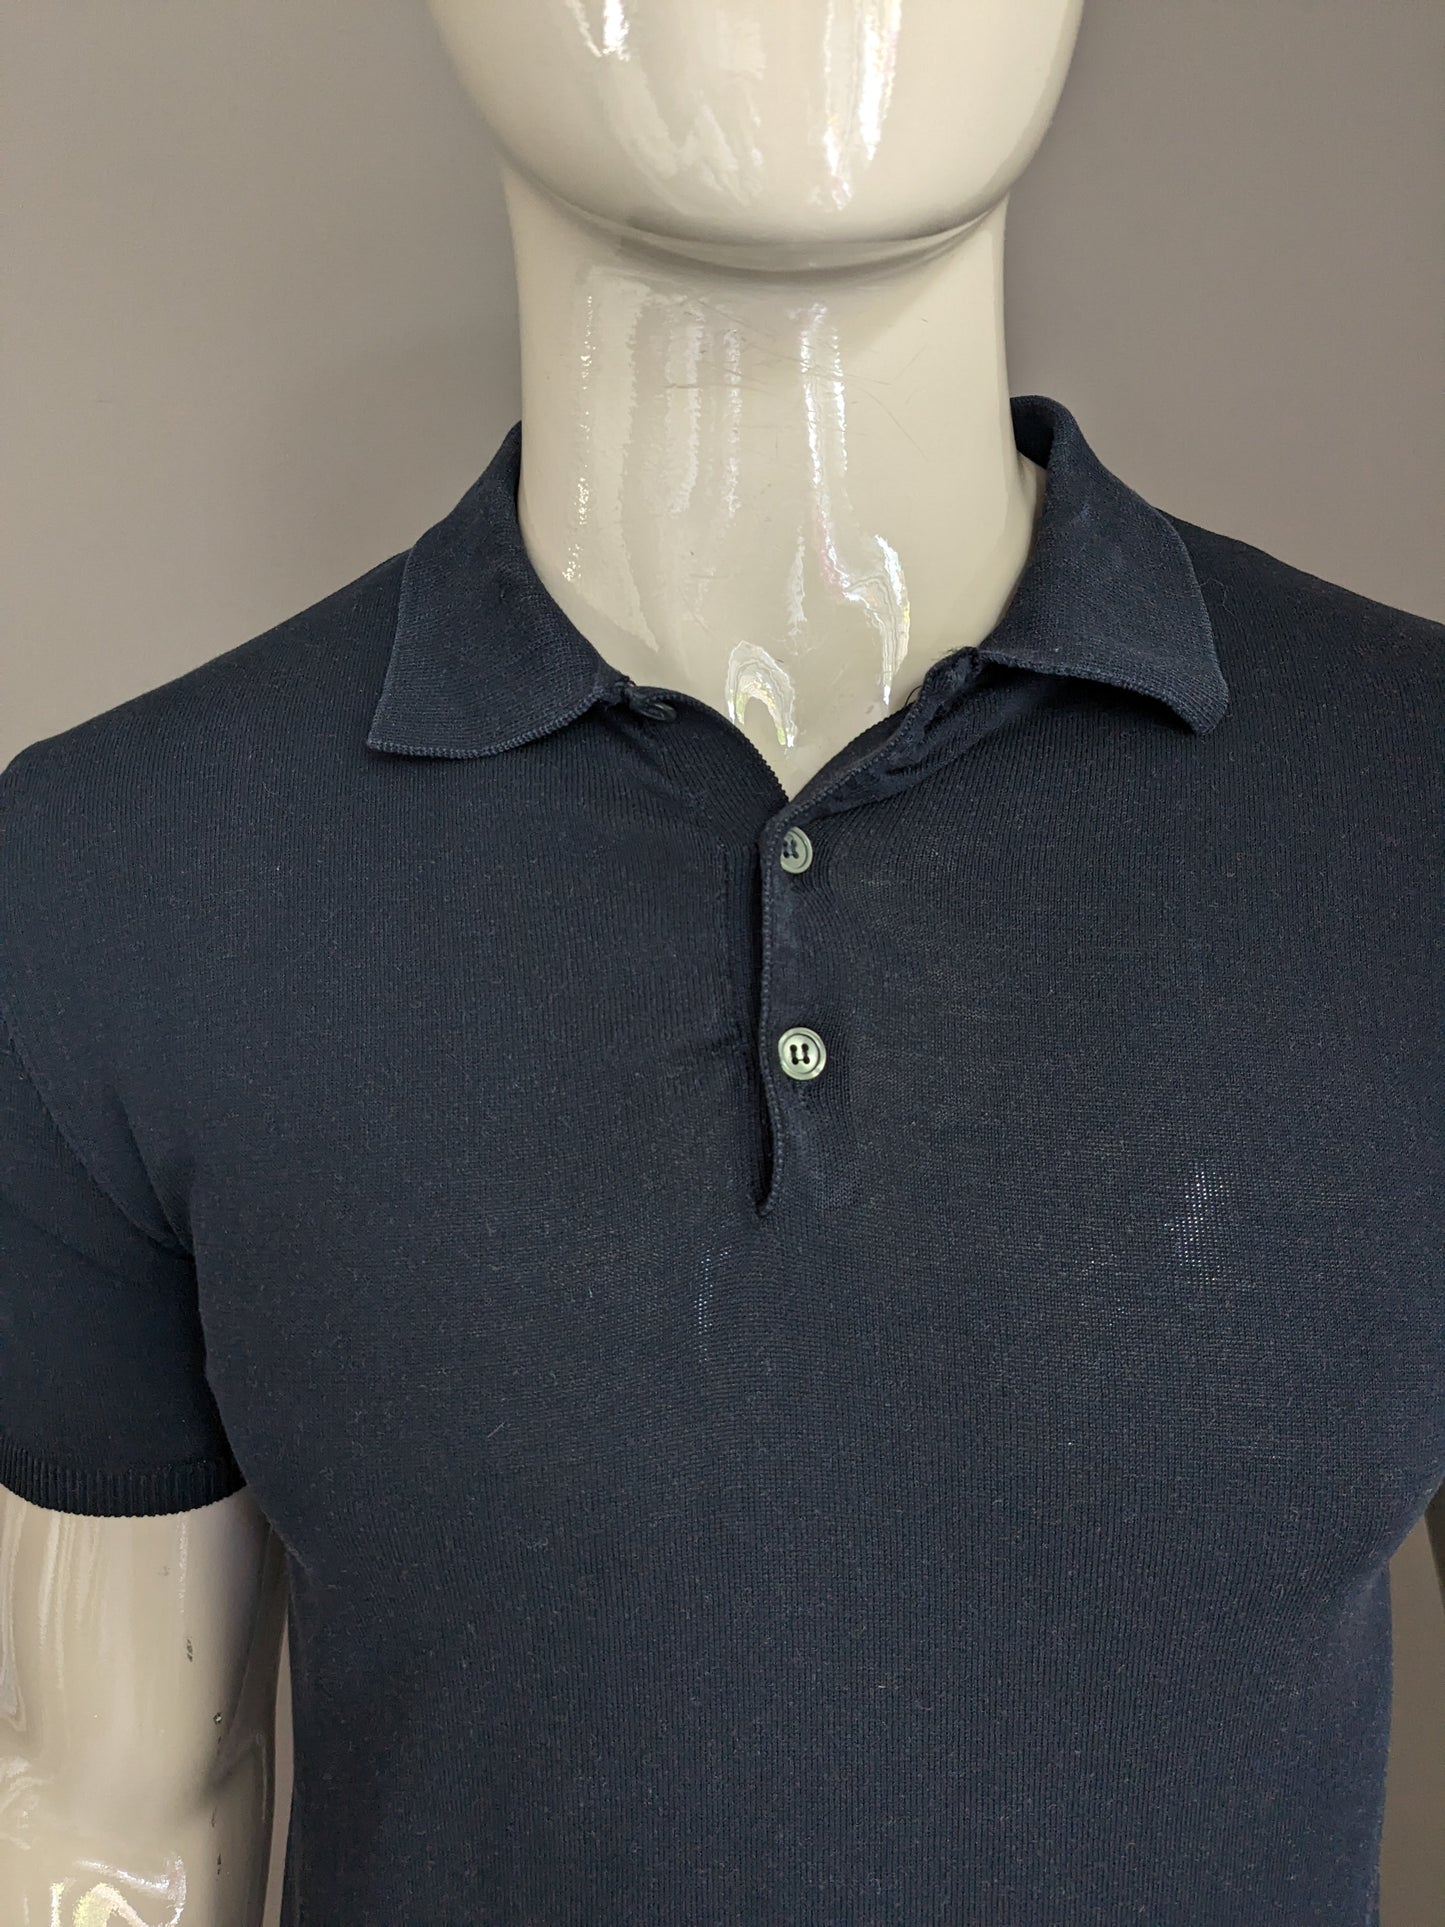 Brian Dales Polo with elastic band. Dark blue colored. Size M.